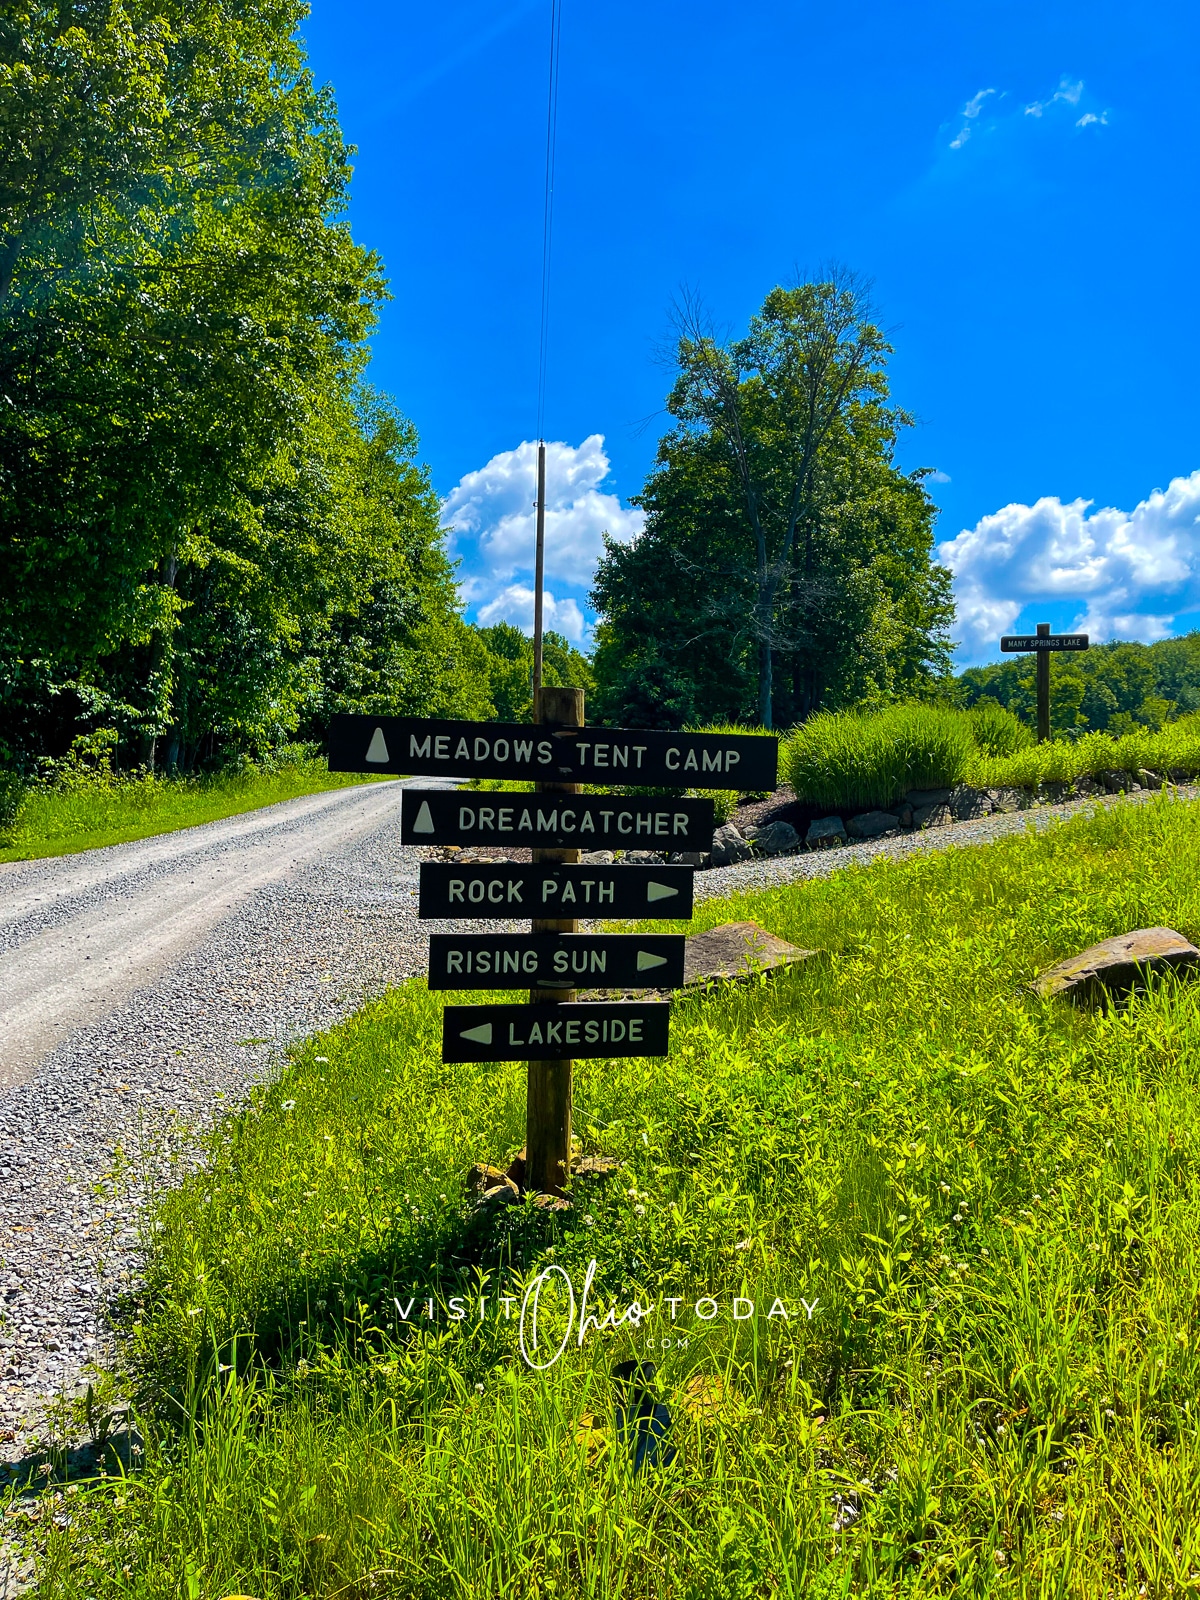 A signpost pointing directions to the various cabins and tents